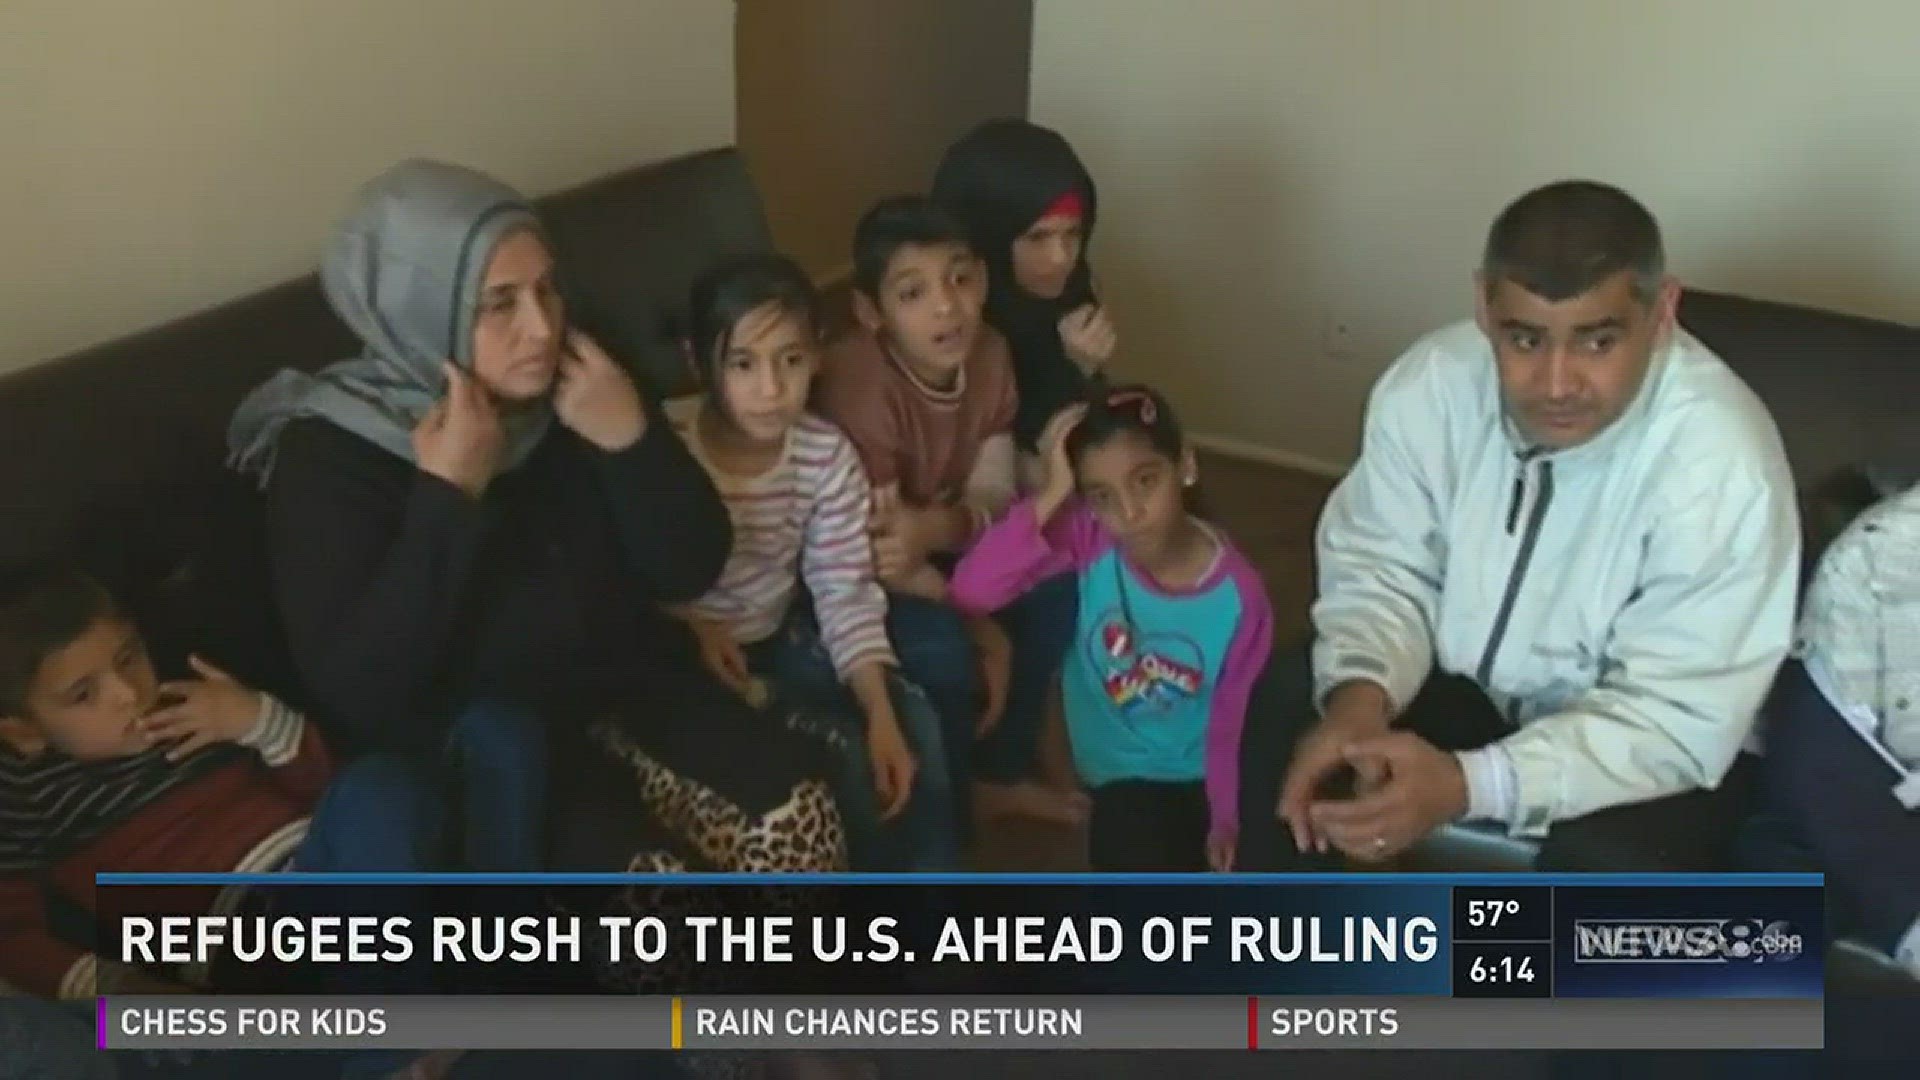 REFUGEES RUSH TO THE U.S. AHEAD OF RULING